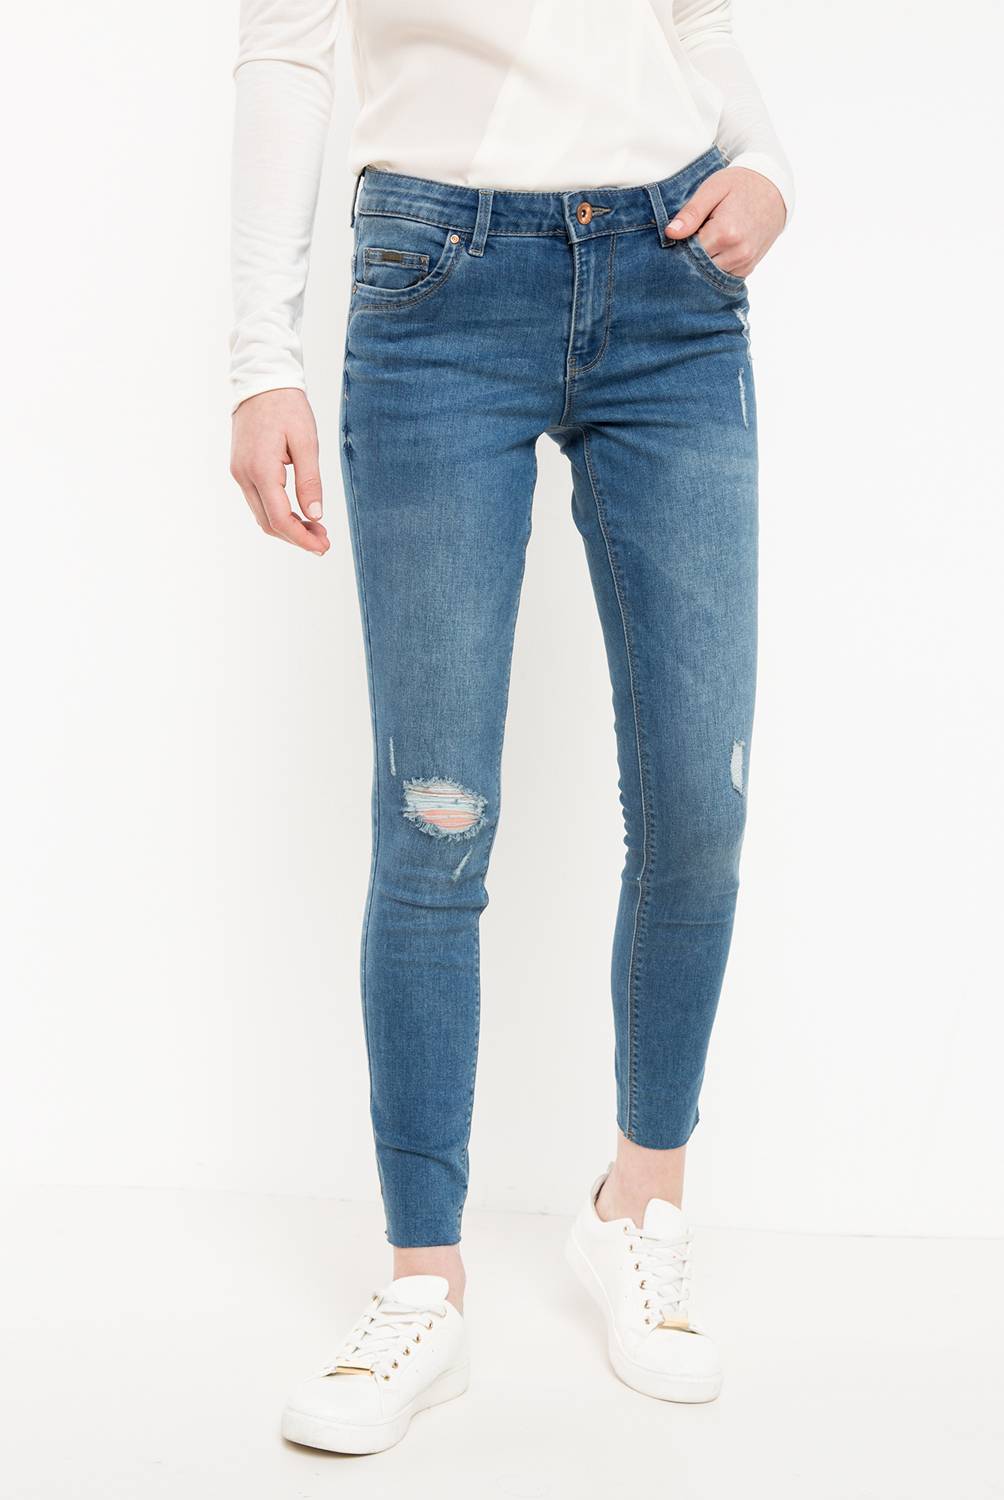 ONLY - Only Jeans Mujer